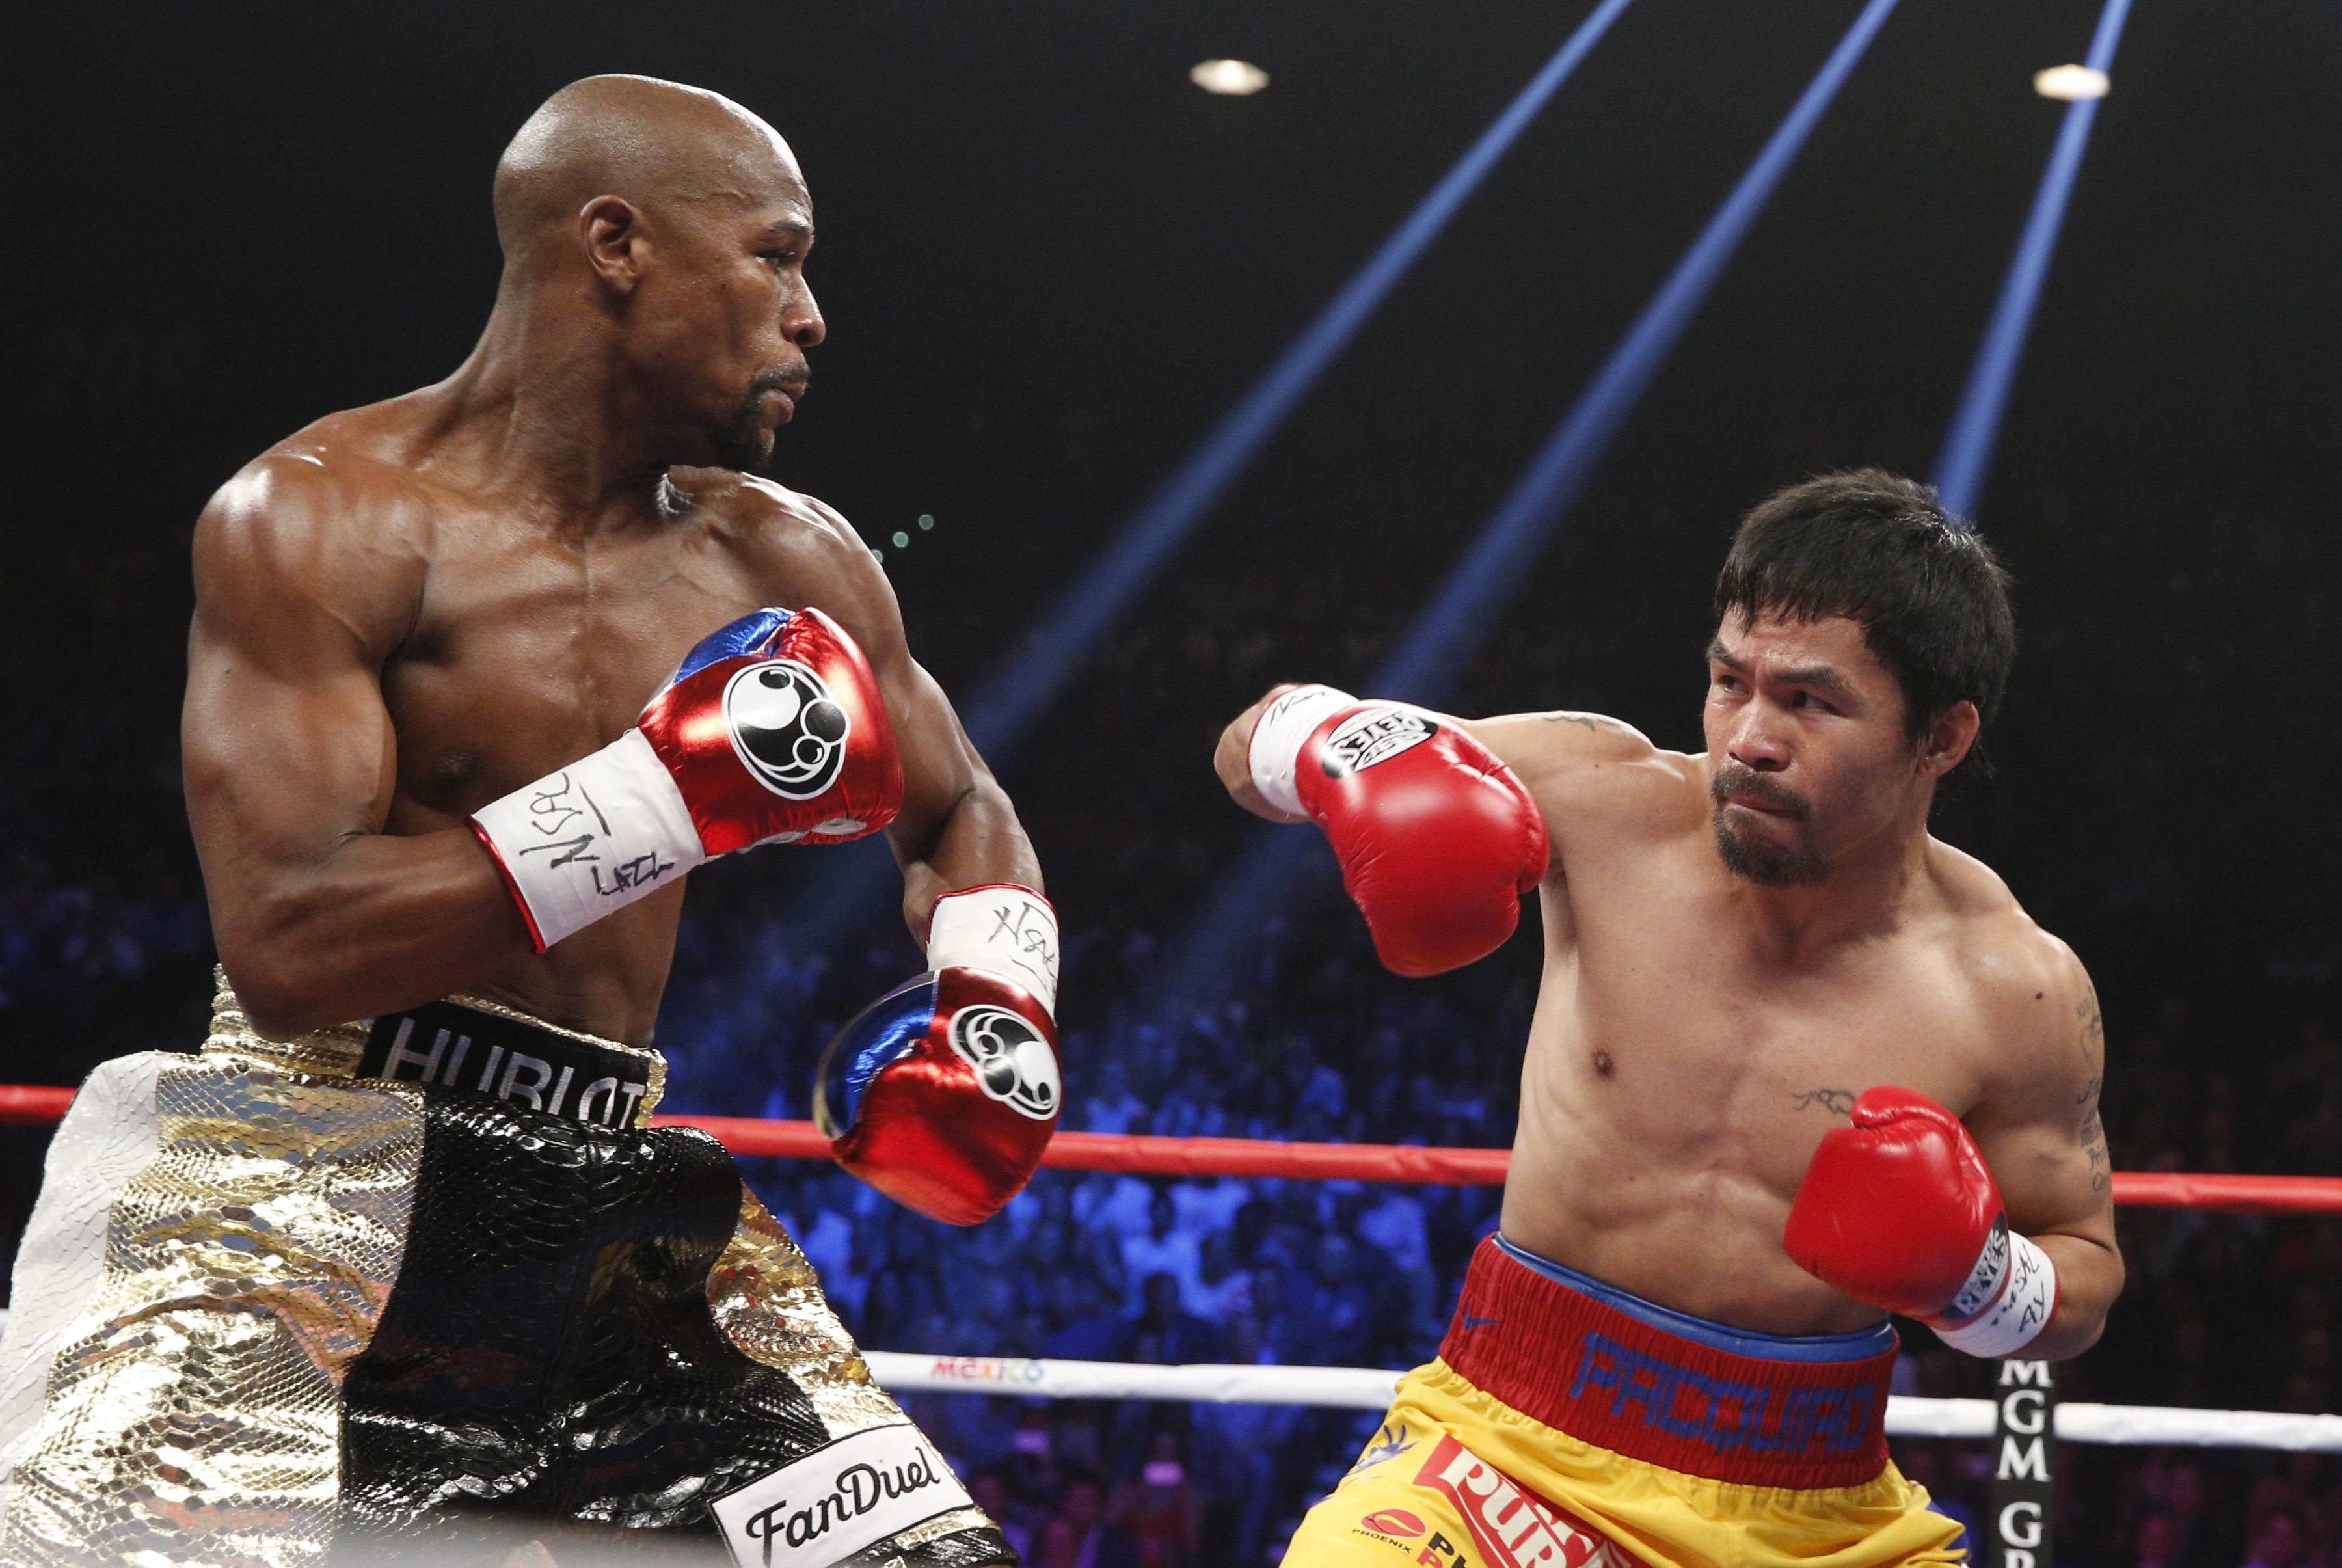 , Five next fights for Floyd Mayweather after Deji including huge rematches with McGregor and Manny Pacquiao and KSI clash